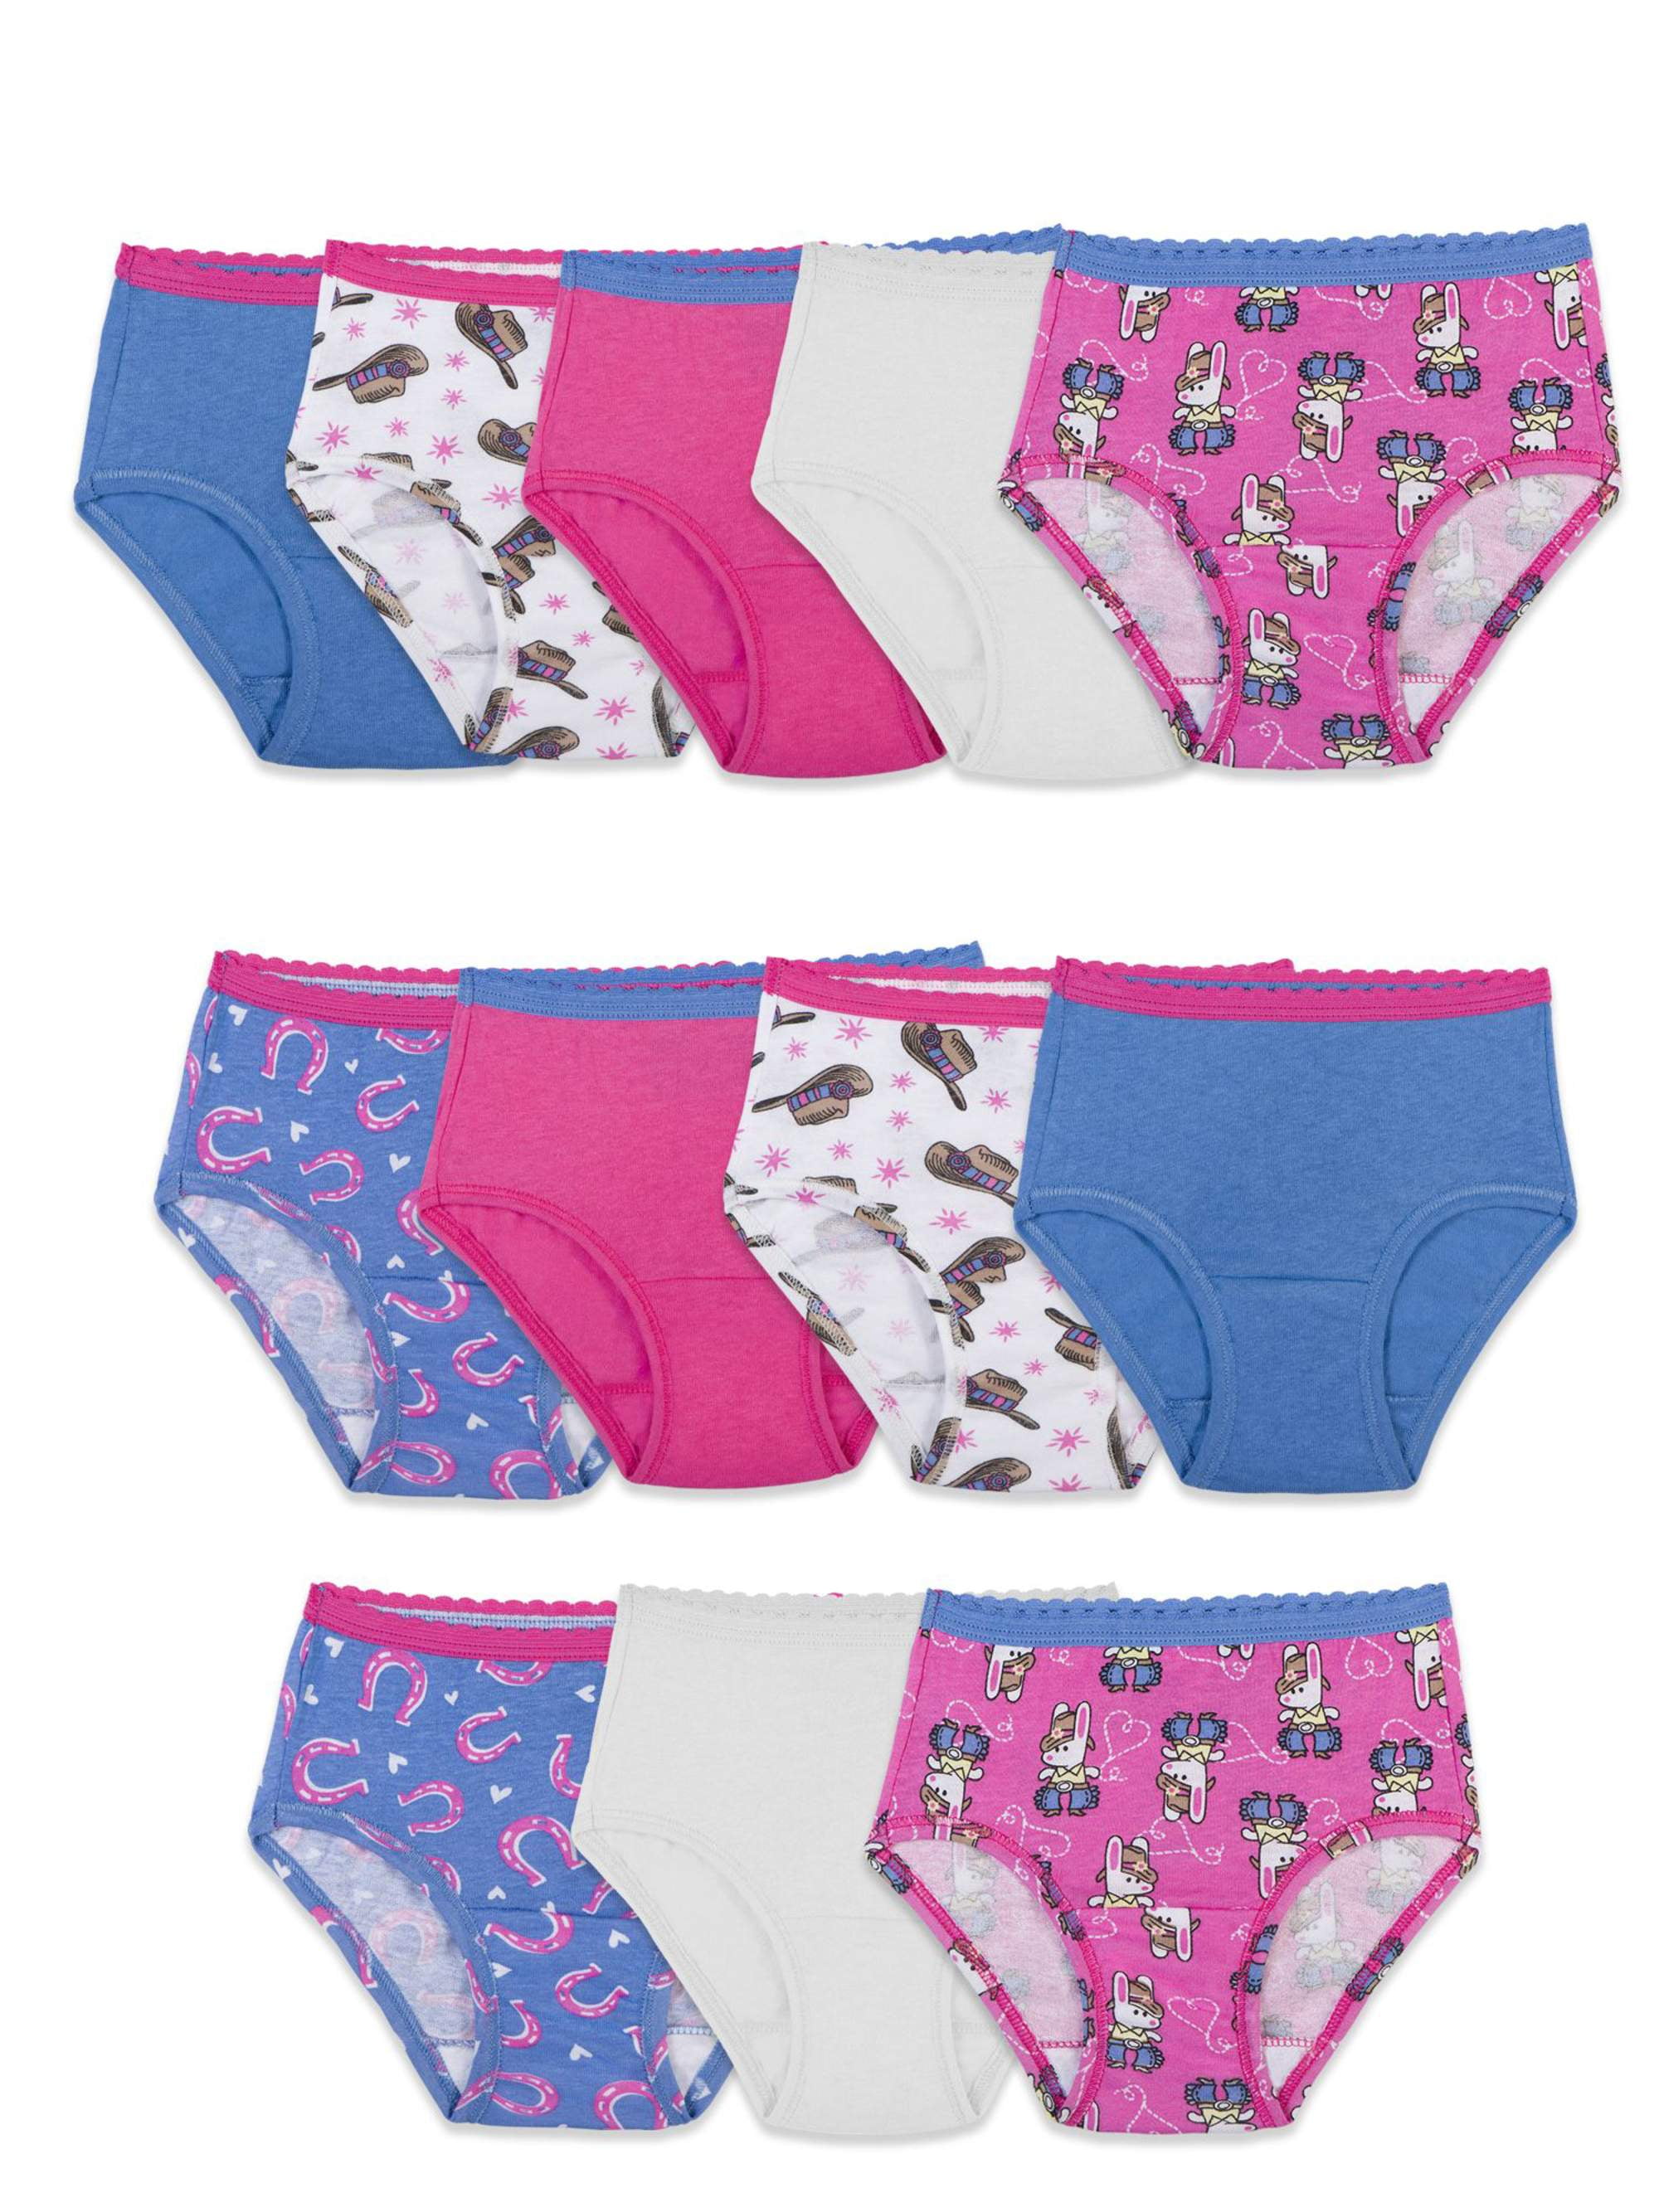 Fruit of the Loom Toddler Girl Brief Underwear, 12 Pack, Sizes 2T-5T 